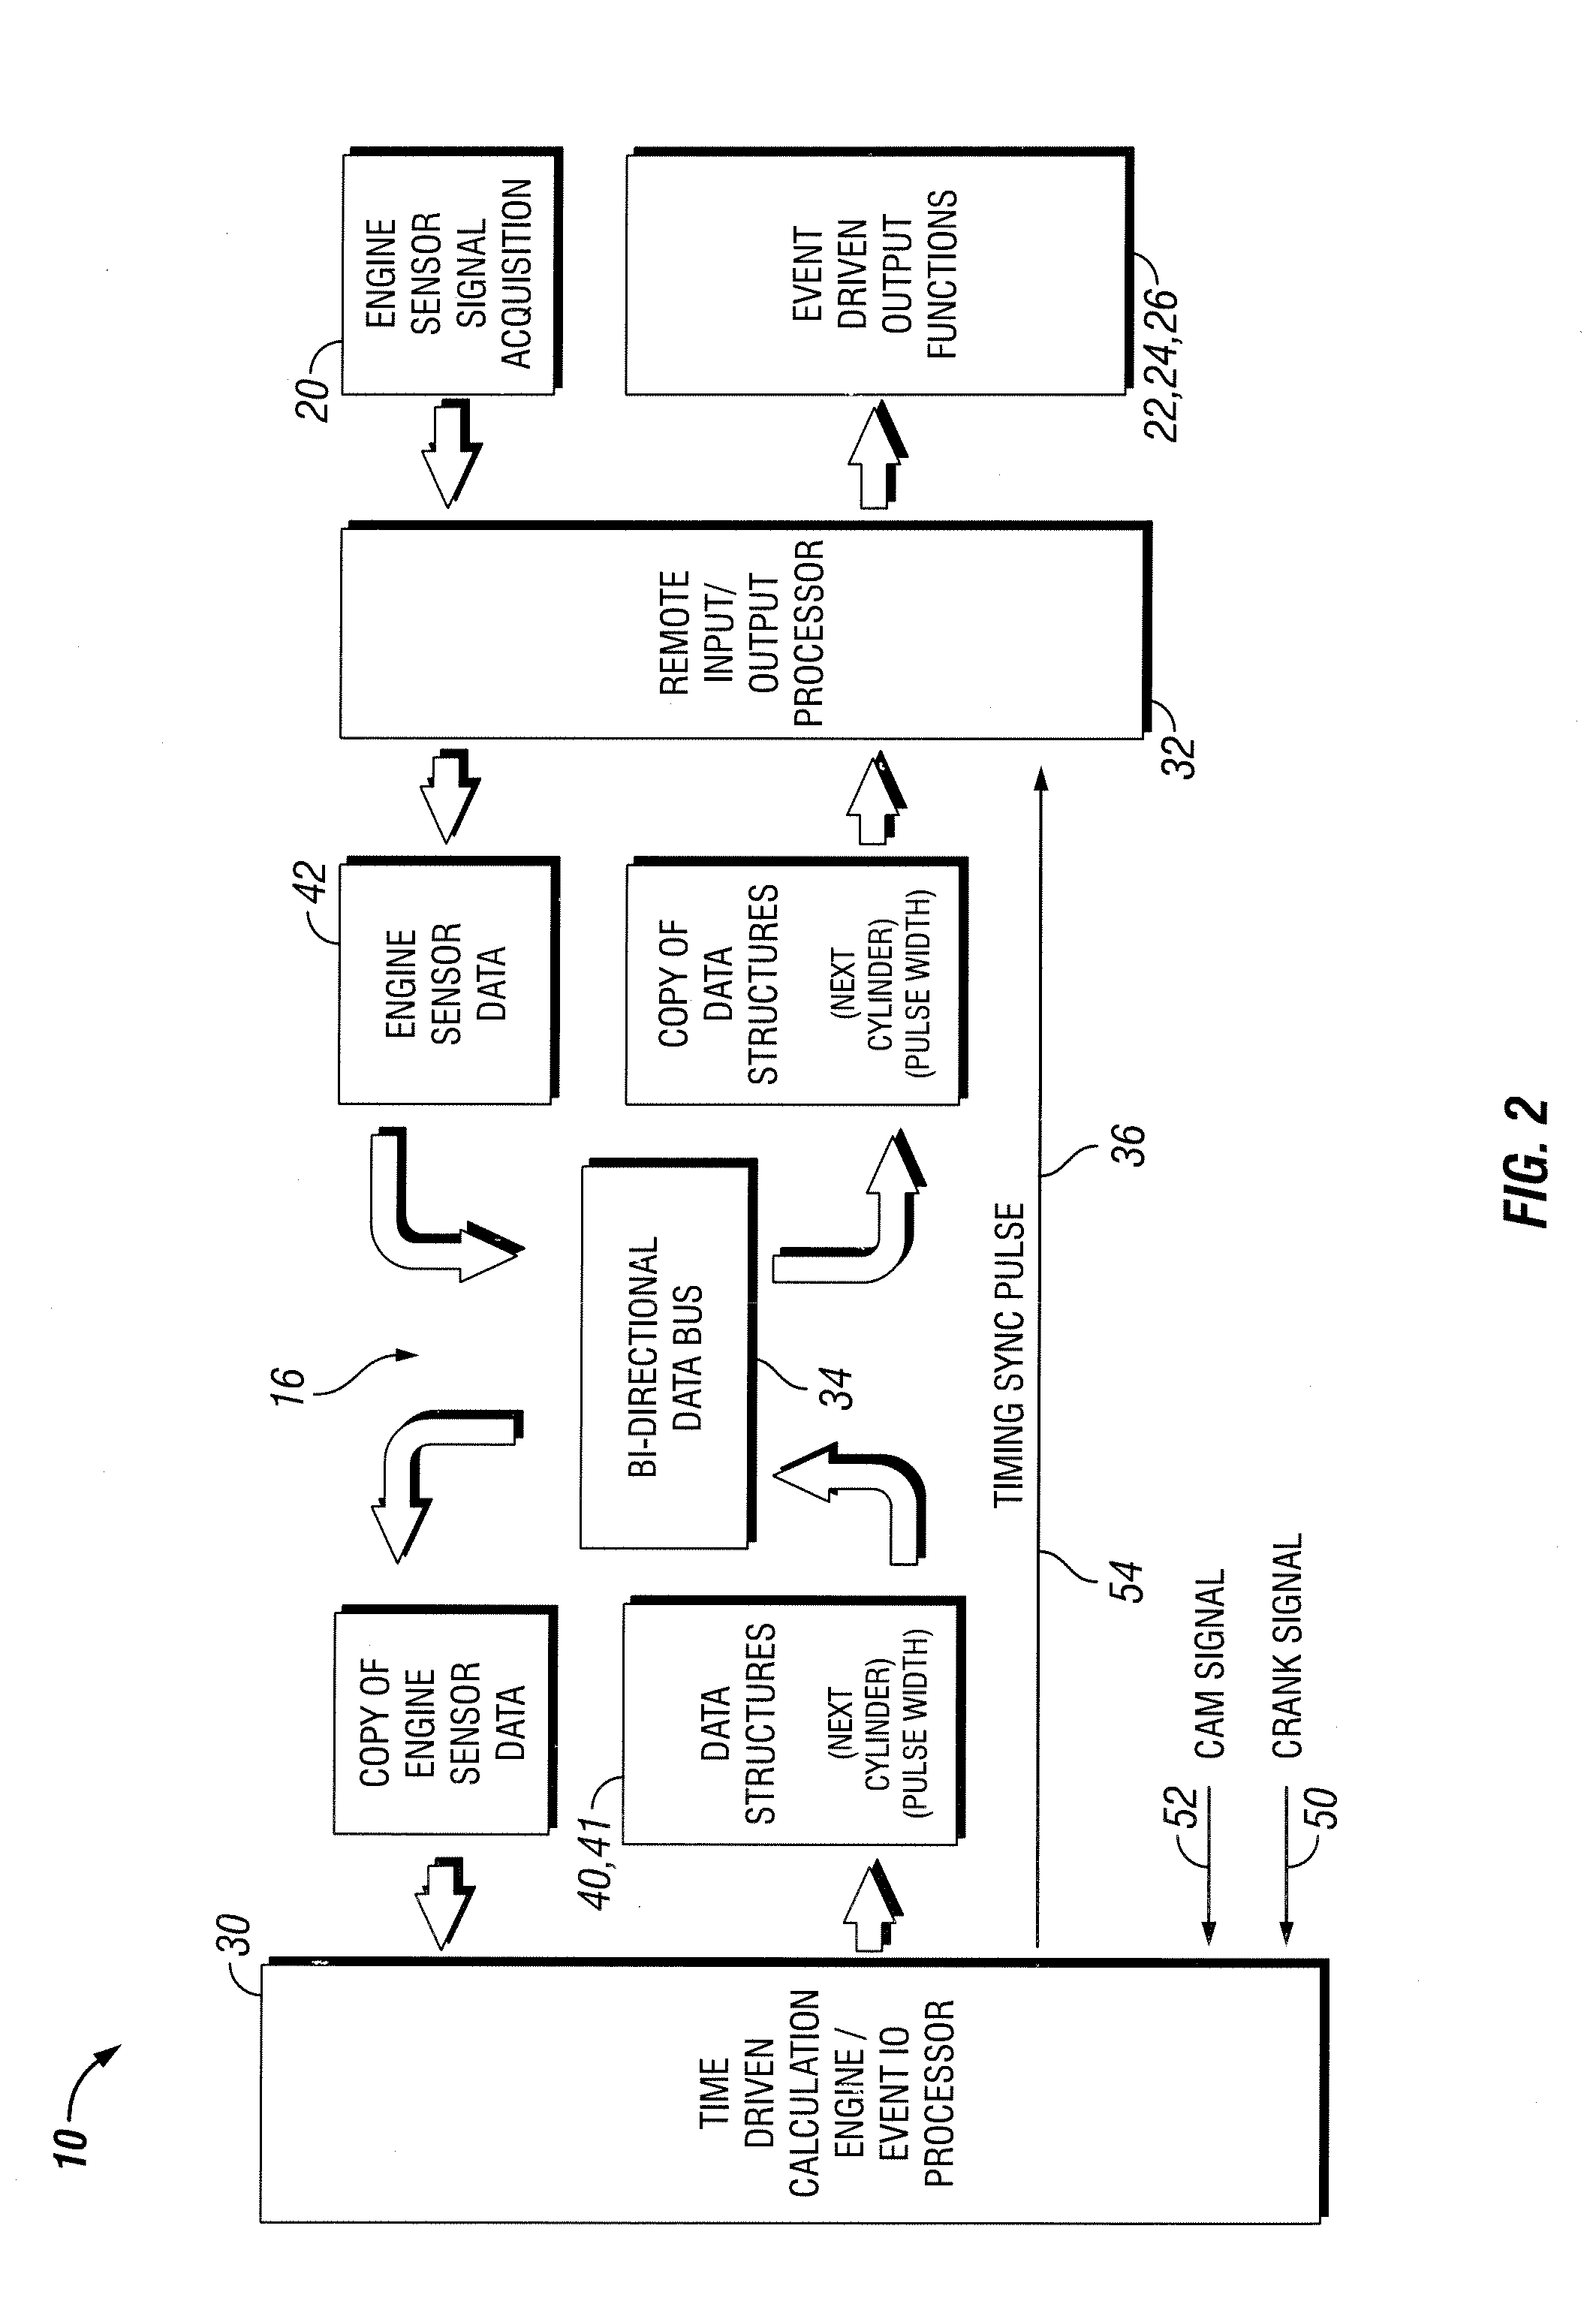 Engine control using an asynchronous data bus